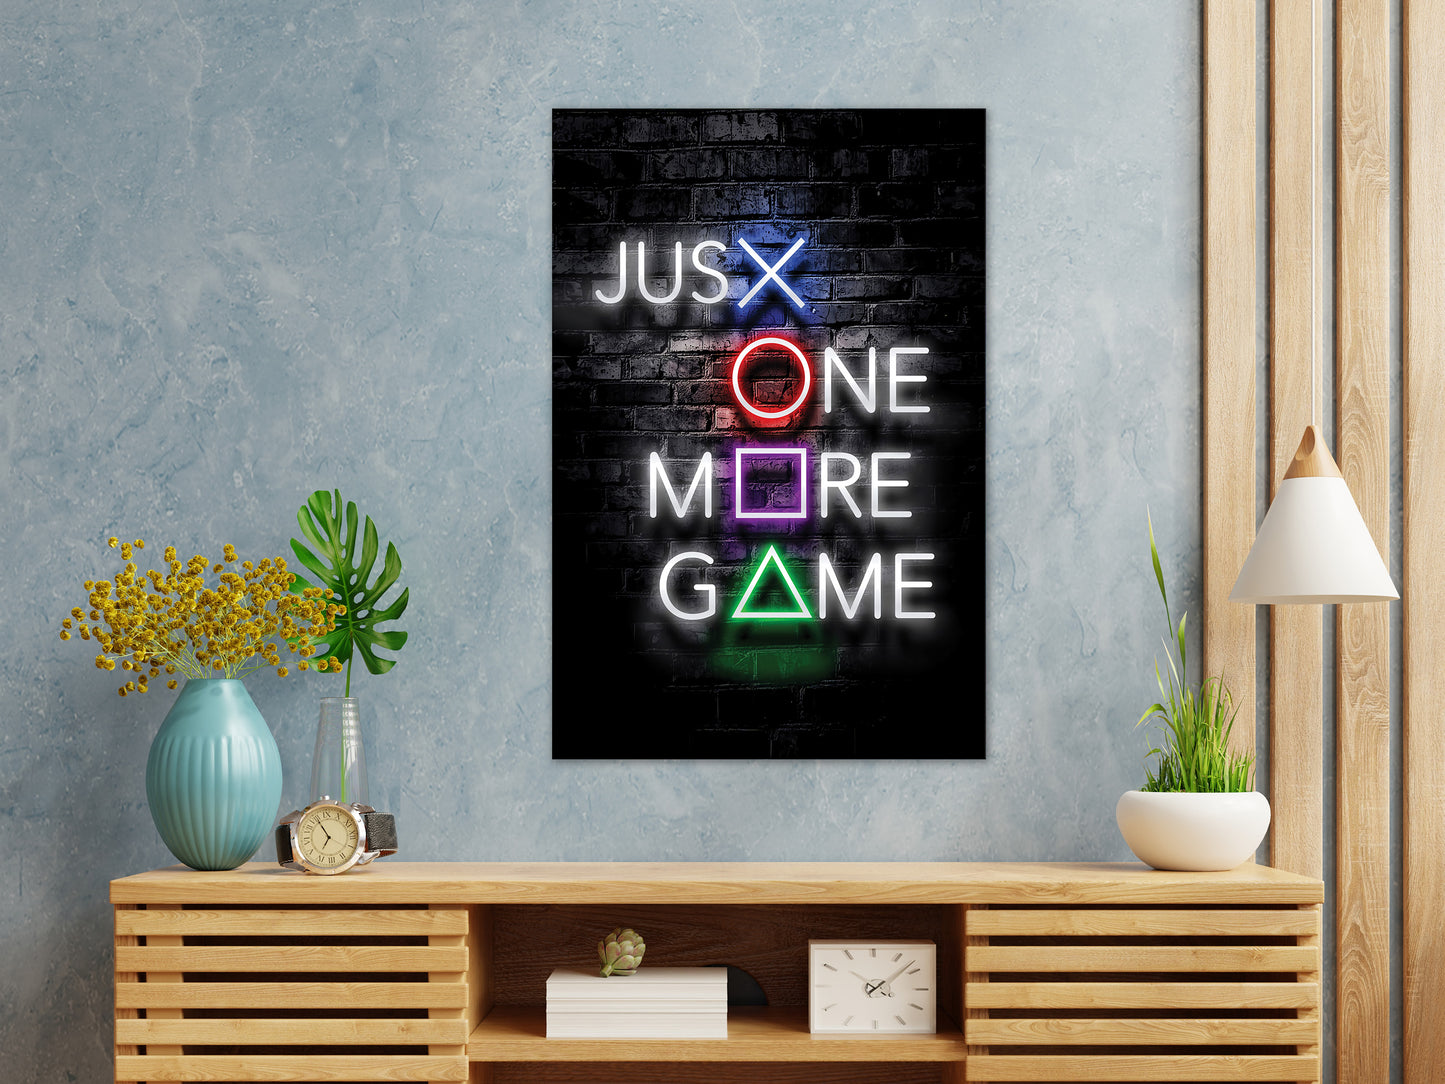 Just One More Game - Vented Canvas